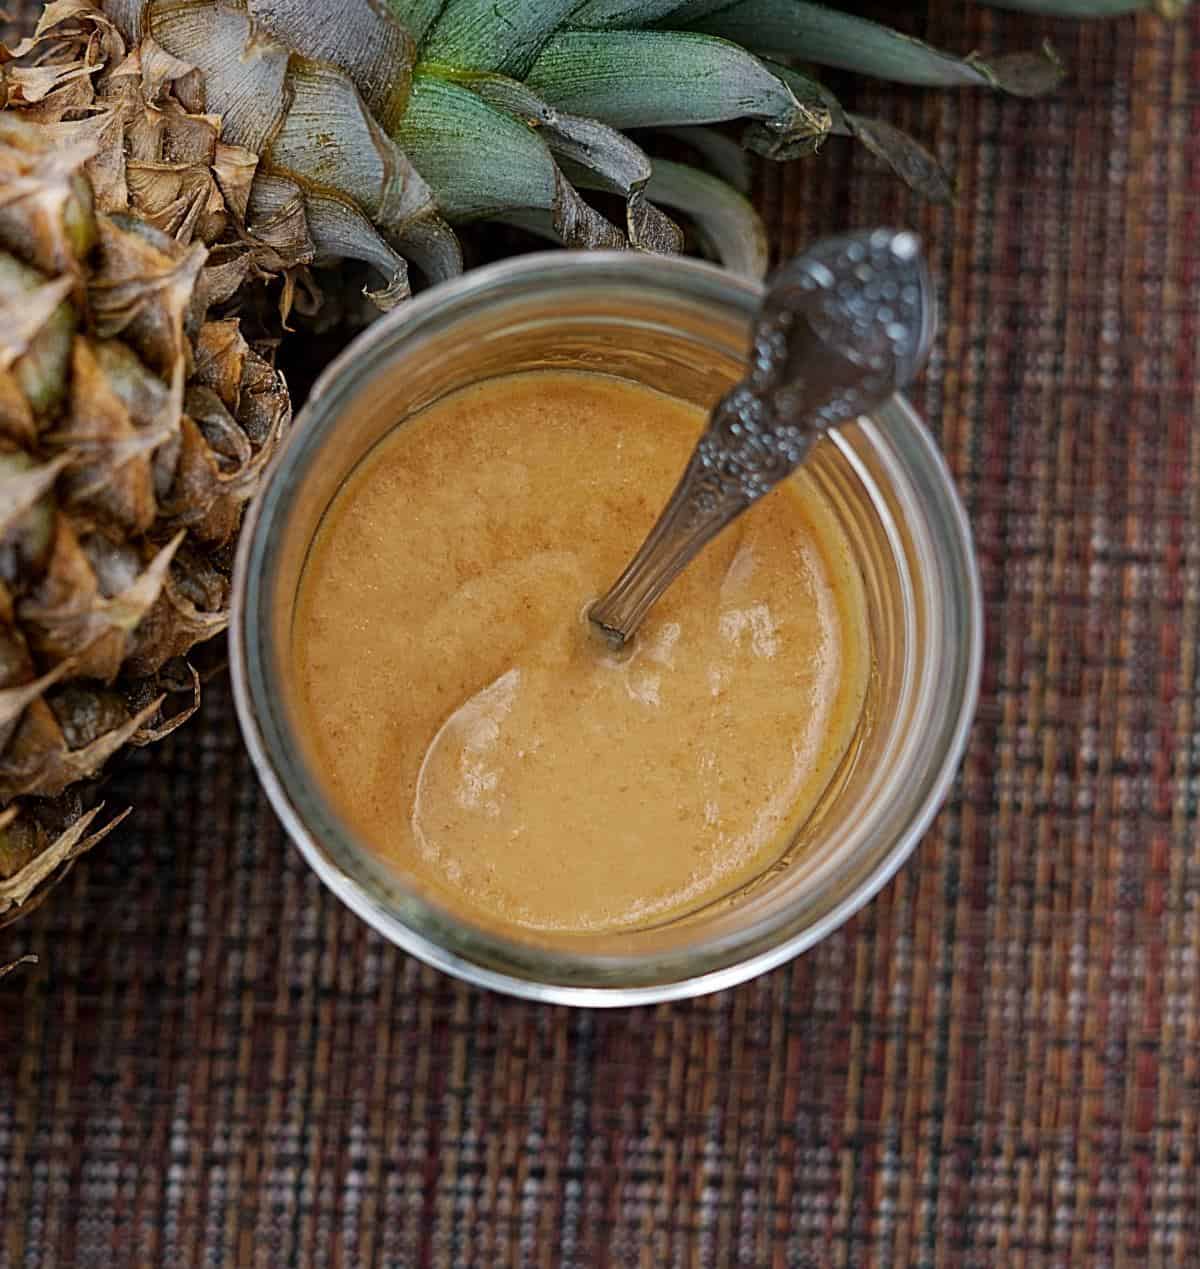 Overhead view of pineapple bacon sauce in a jar with a spoon next to a whole pineapple.